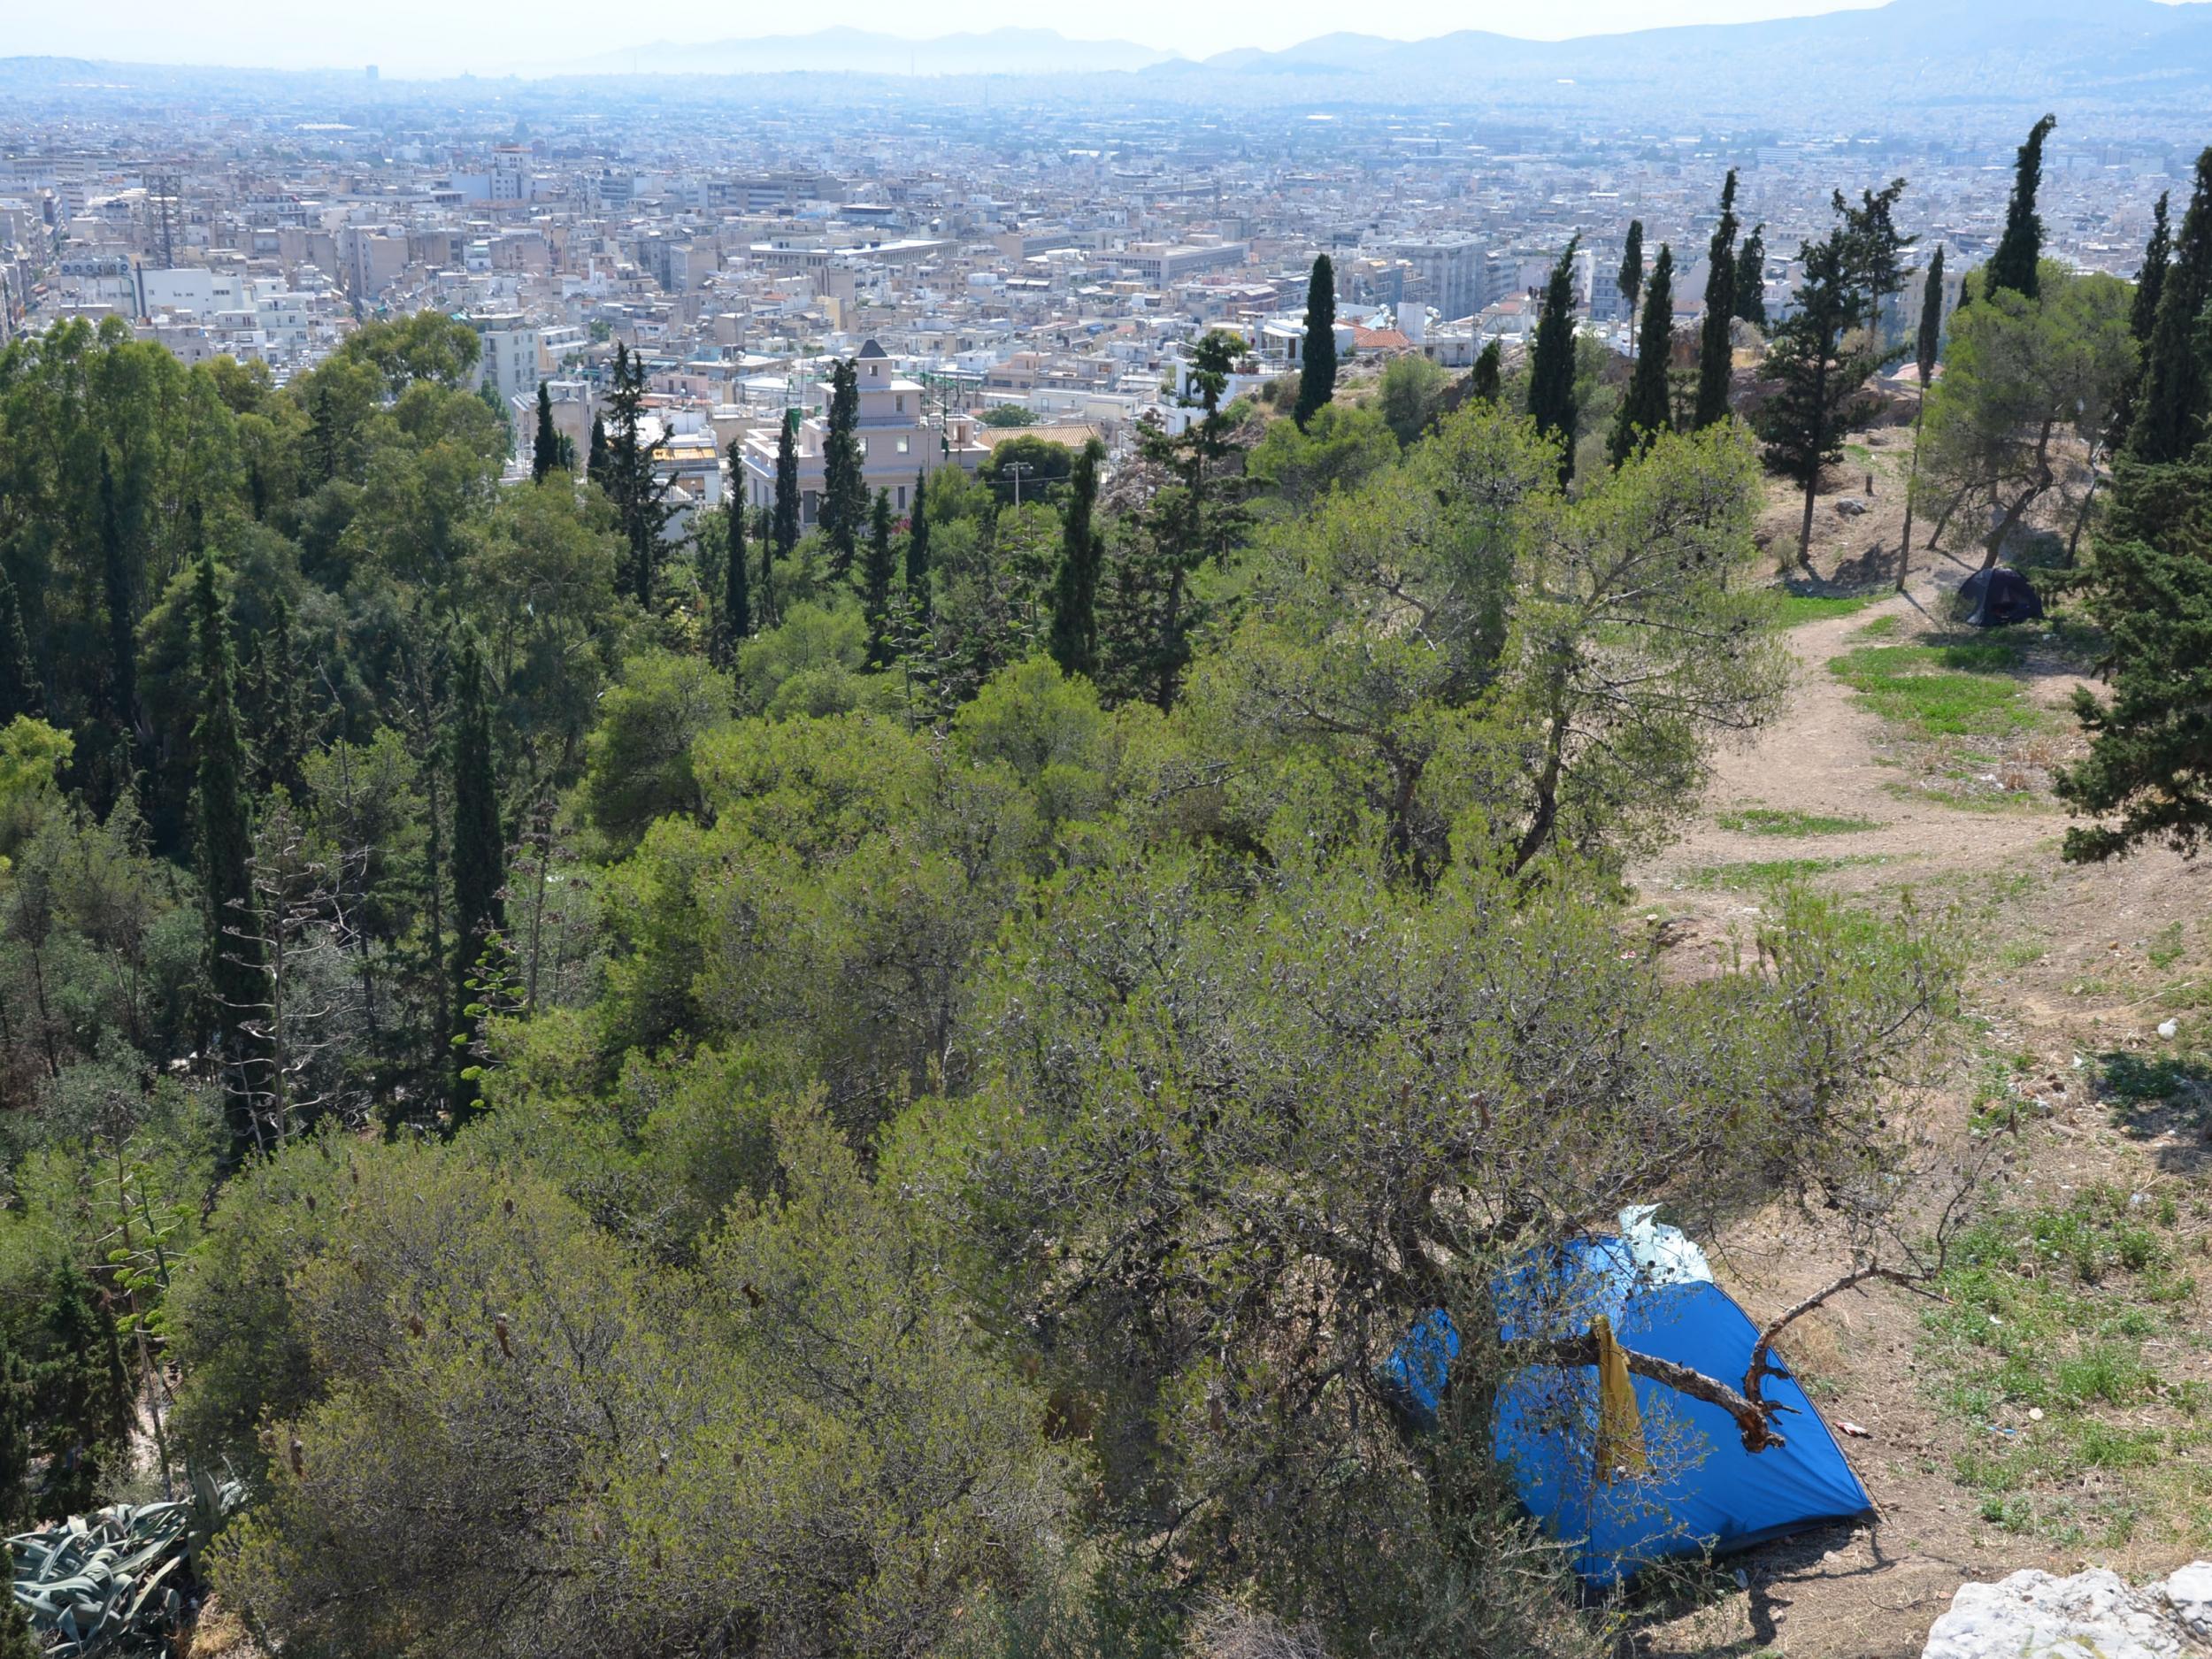 A tent set-up on Strefi Hill, at the top of Exarcheia, Athen’s anarchist district, where many people live in empty buildings and squats